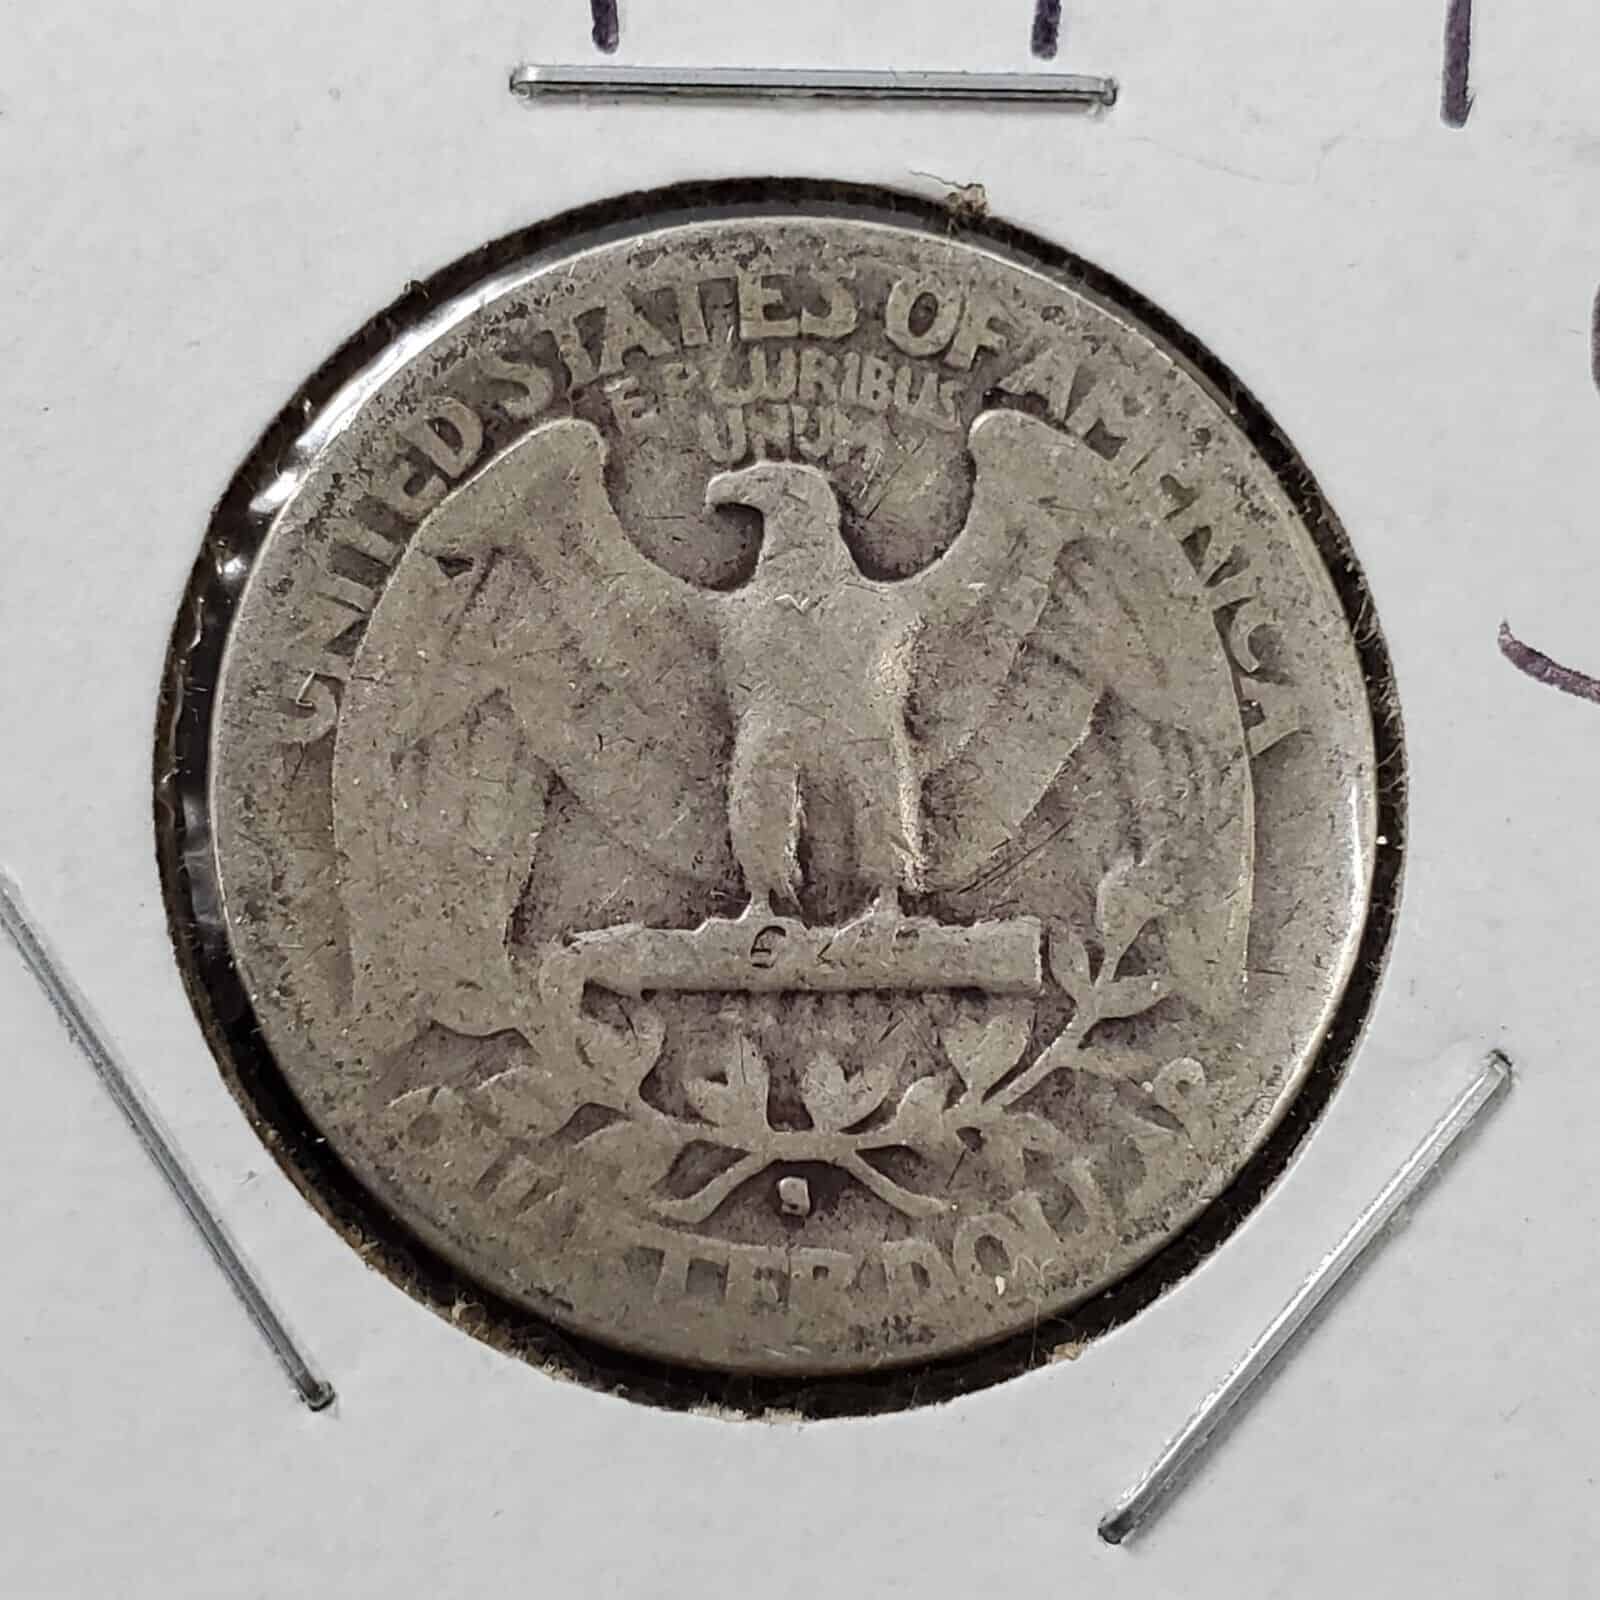 1941 Quarter Large –S and Small -s